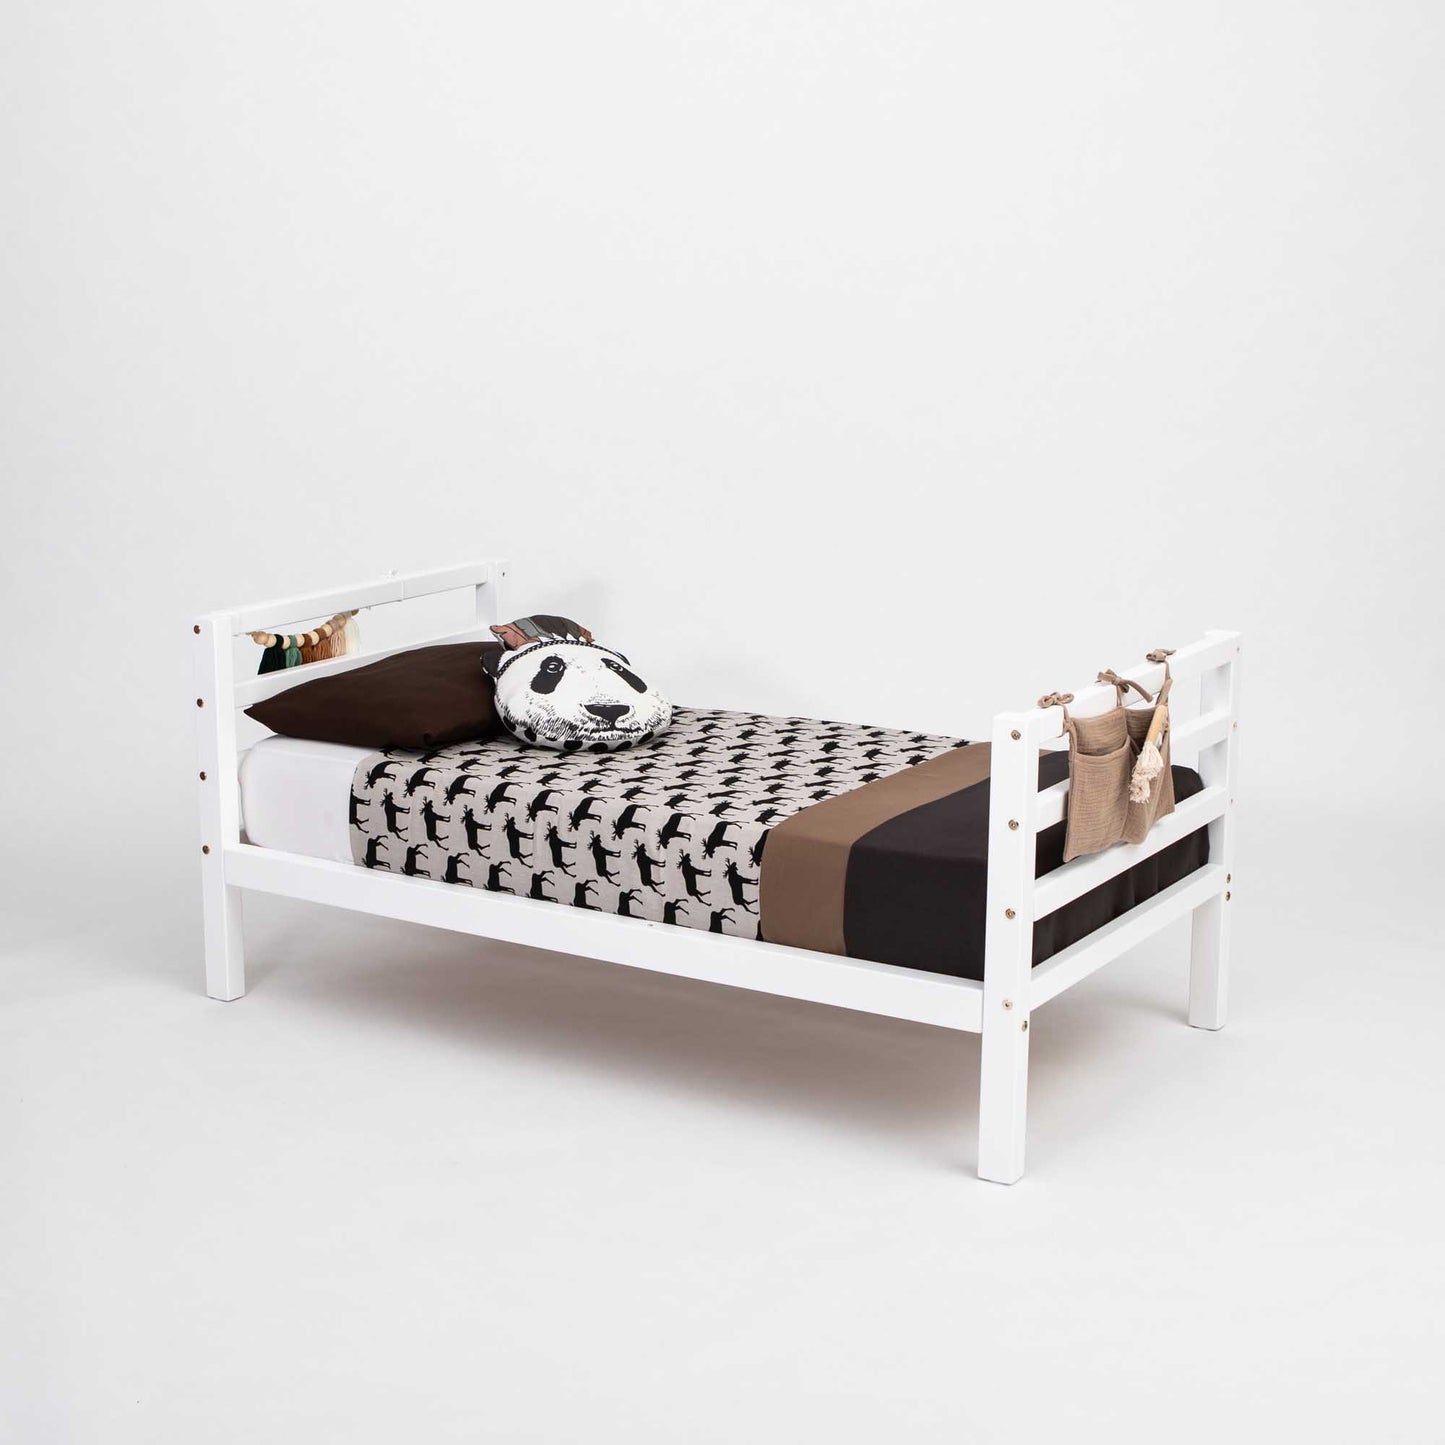 A Sweet Home From Wood Kids' bed on legs with a horizontal rail headboard and footboard, featuring a white wooden design and adorned with a black and brown pillow for comfortable co-sleeping.